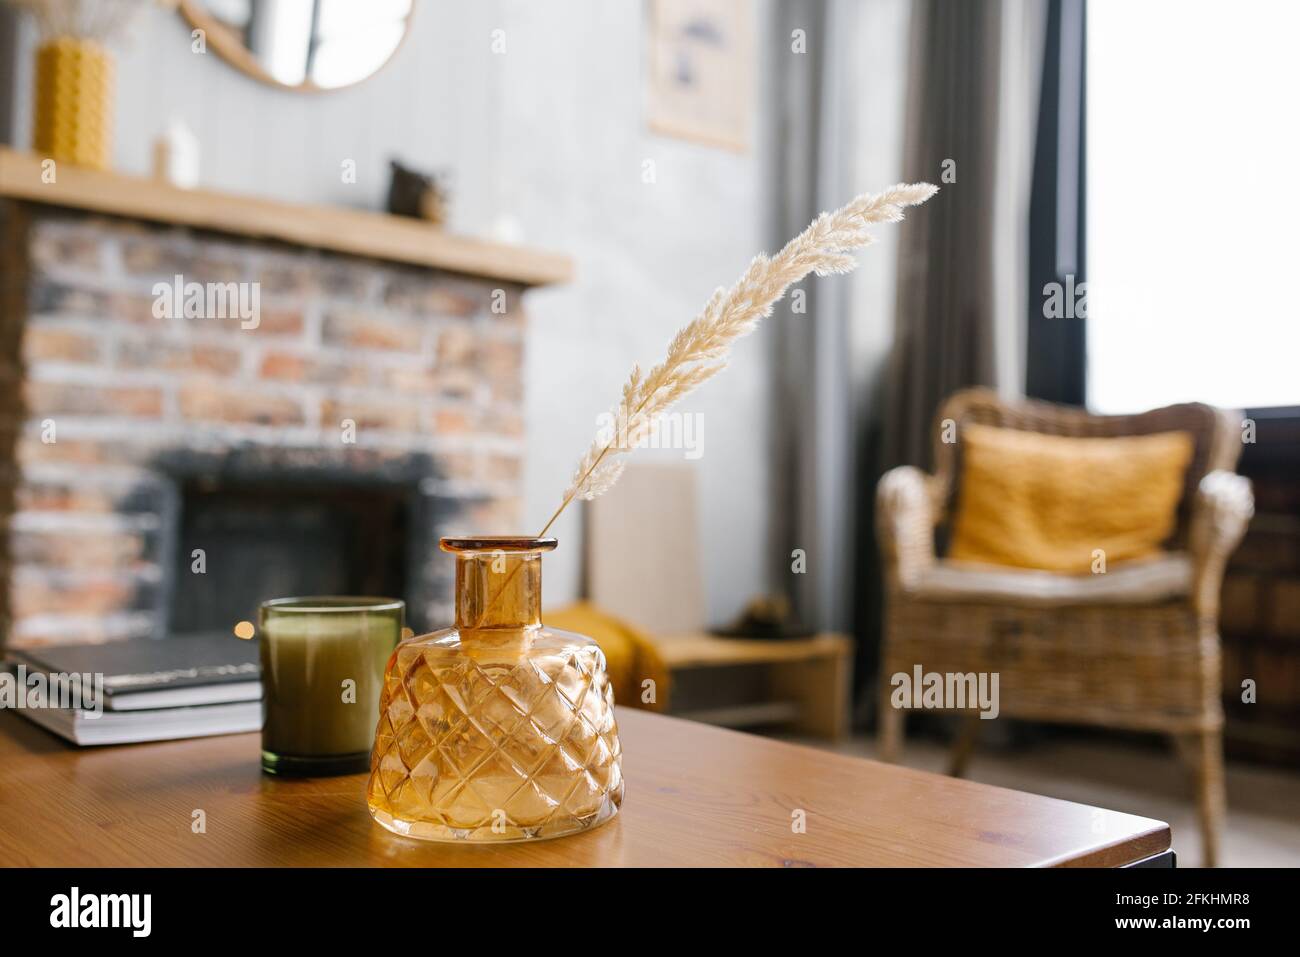 A vase of dried flowers on the table. Scandinavian classic room with wooden details and a brick fireplace, minimalistic interior design. a real photo. Stock Photo